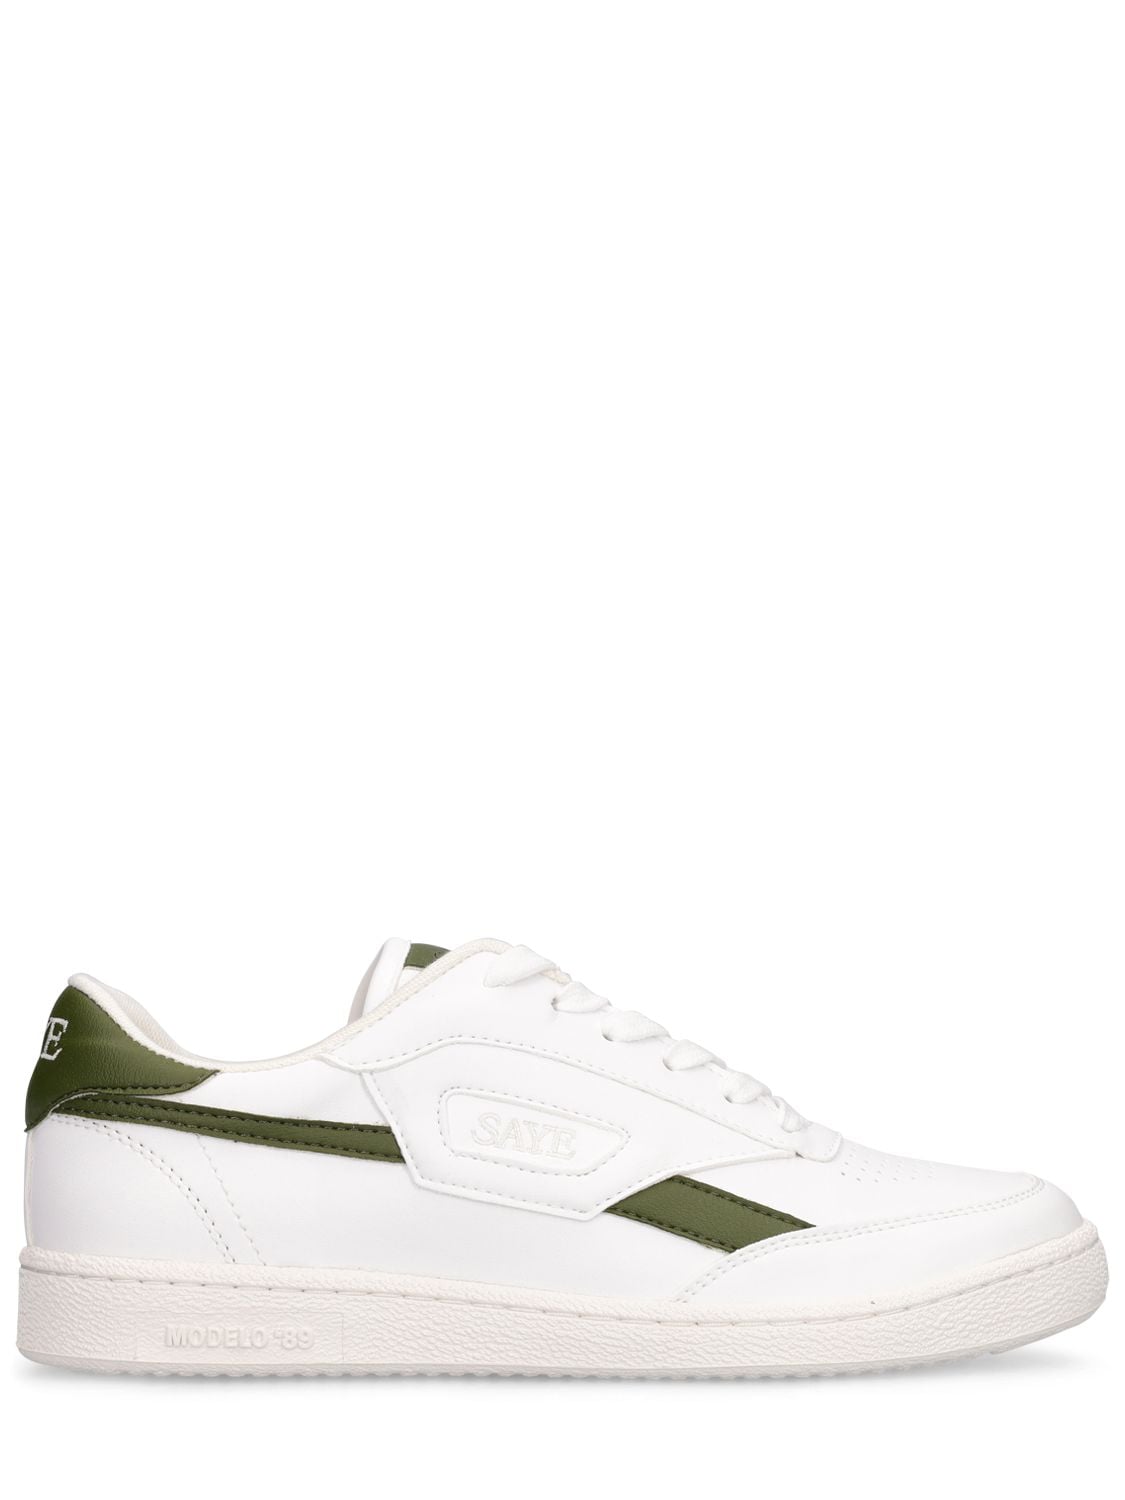 Saye Modelo '89 Vegan Cactus Trainers In White At Urban Outfitters